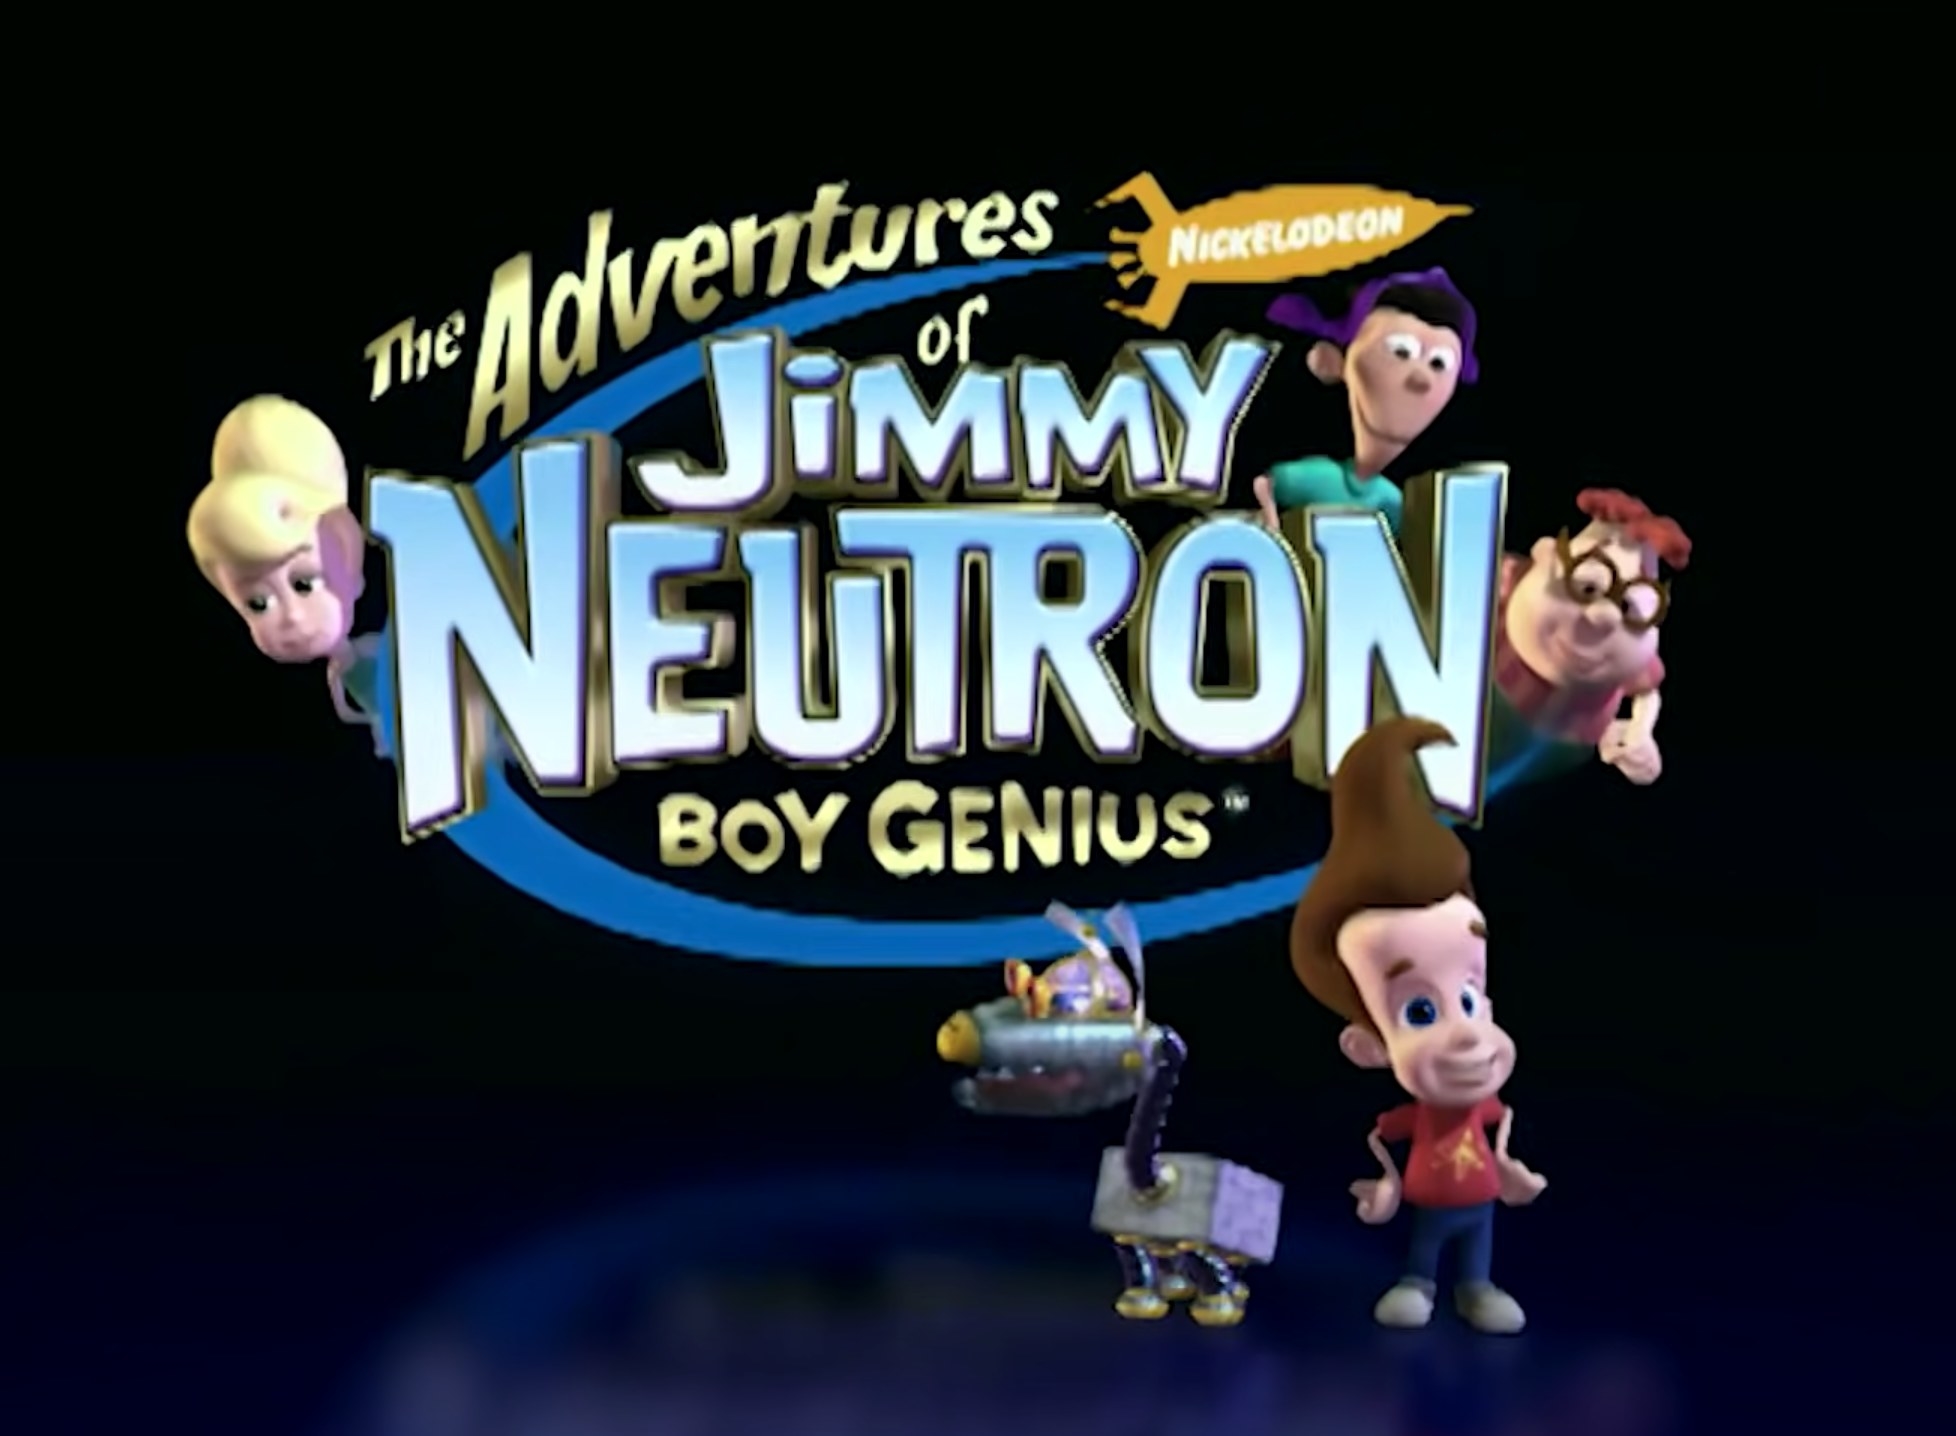 The logo of &quot;The Adventures of Jimmy Neutron, Boy Genius&quot; from the show&#x27;s intro, which shows characters Cindy Vortex, Sheen Estevez, Carl Wheezer, Jimmy Neutron, and Jimmy&#x27;s pet robot dog, Goddard